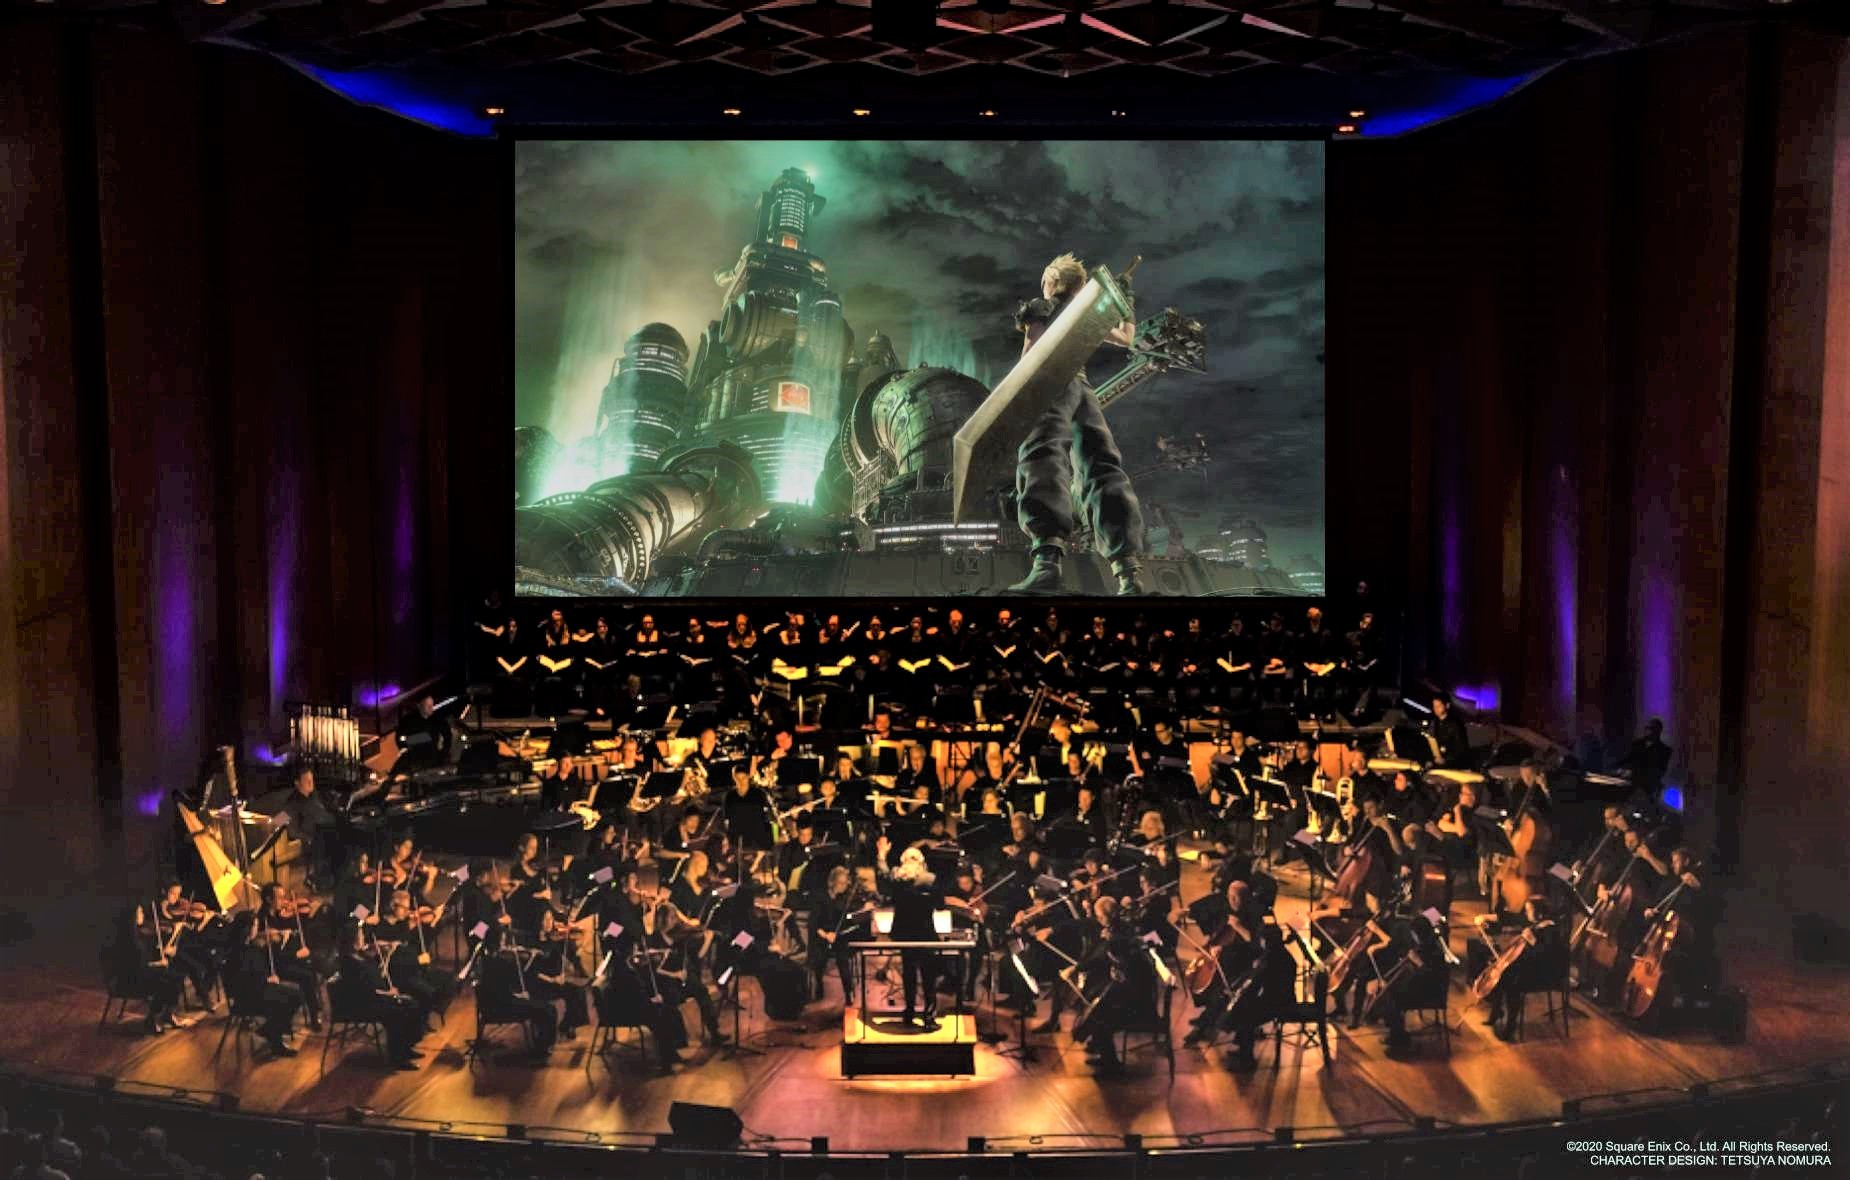 Final Fantasy VII Remake Orchestra World Tour officially kicks off in